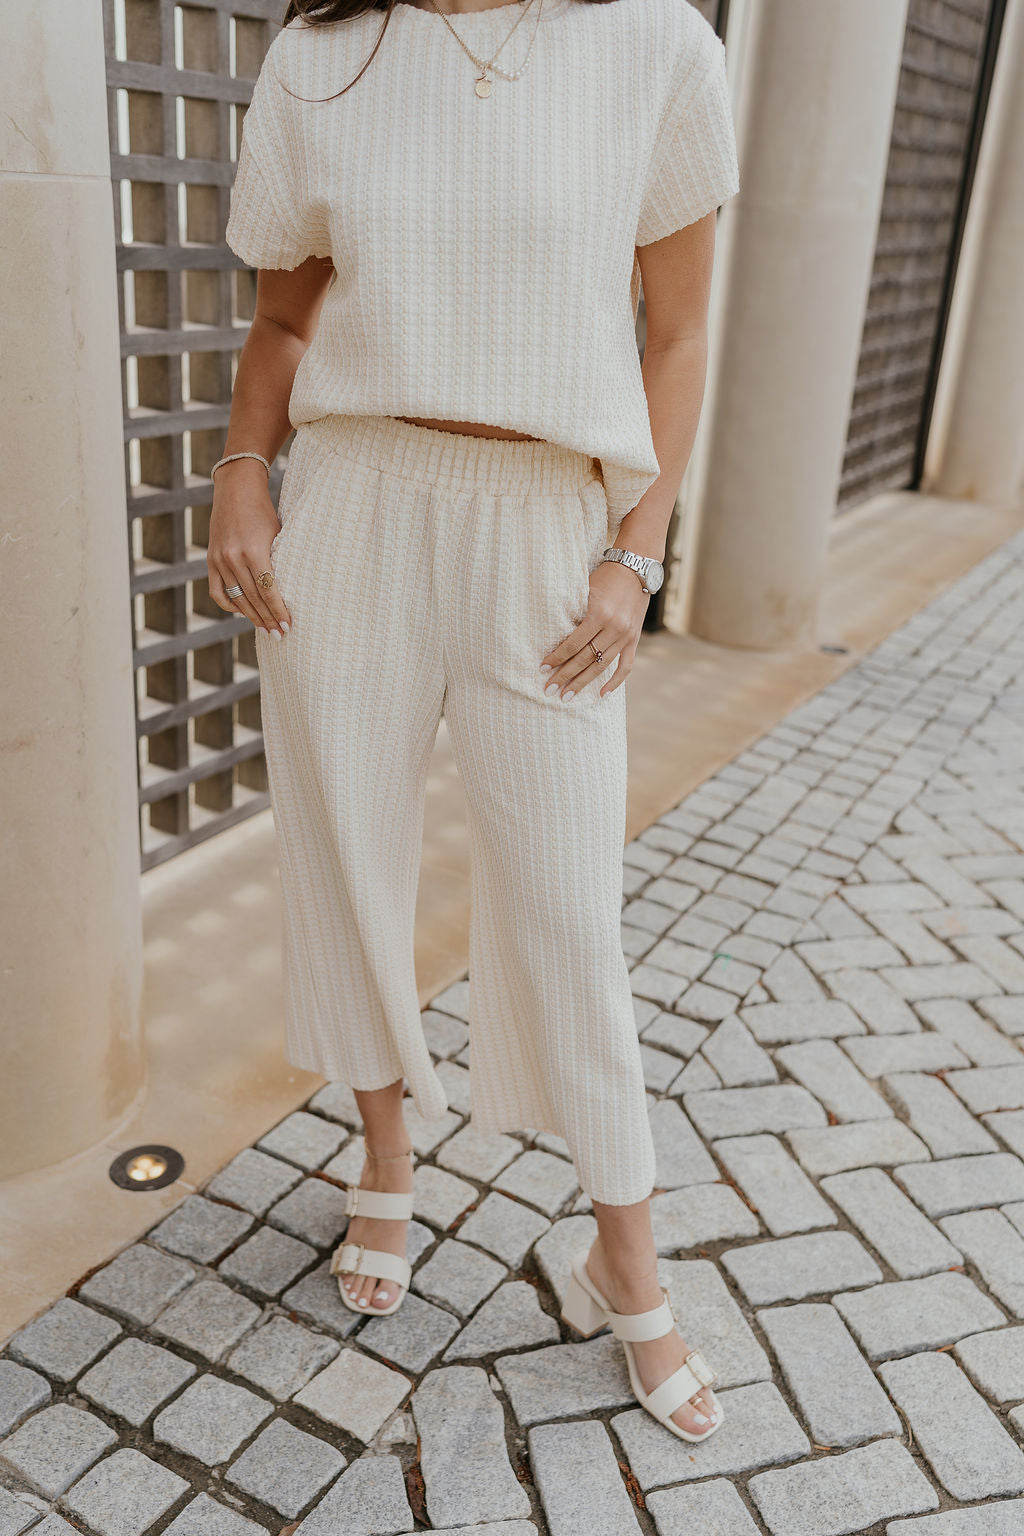 Front view of female model wearing the Willow Cream Woven Cropped Pants which features Cream and White Woven Design, Cropped Wide Pant Legs, Two Pockets On Each Side and Elastic Waistband